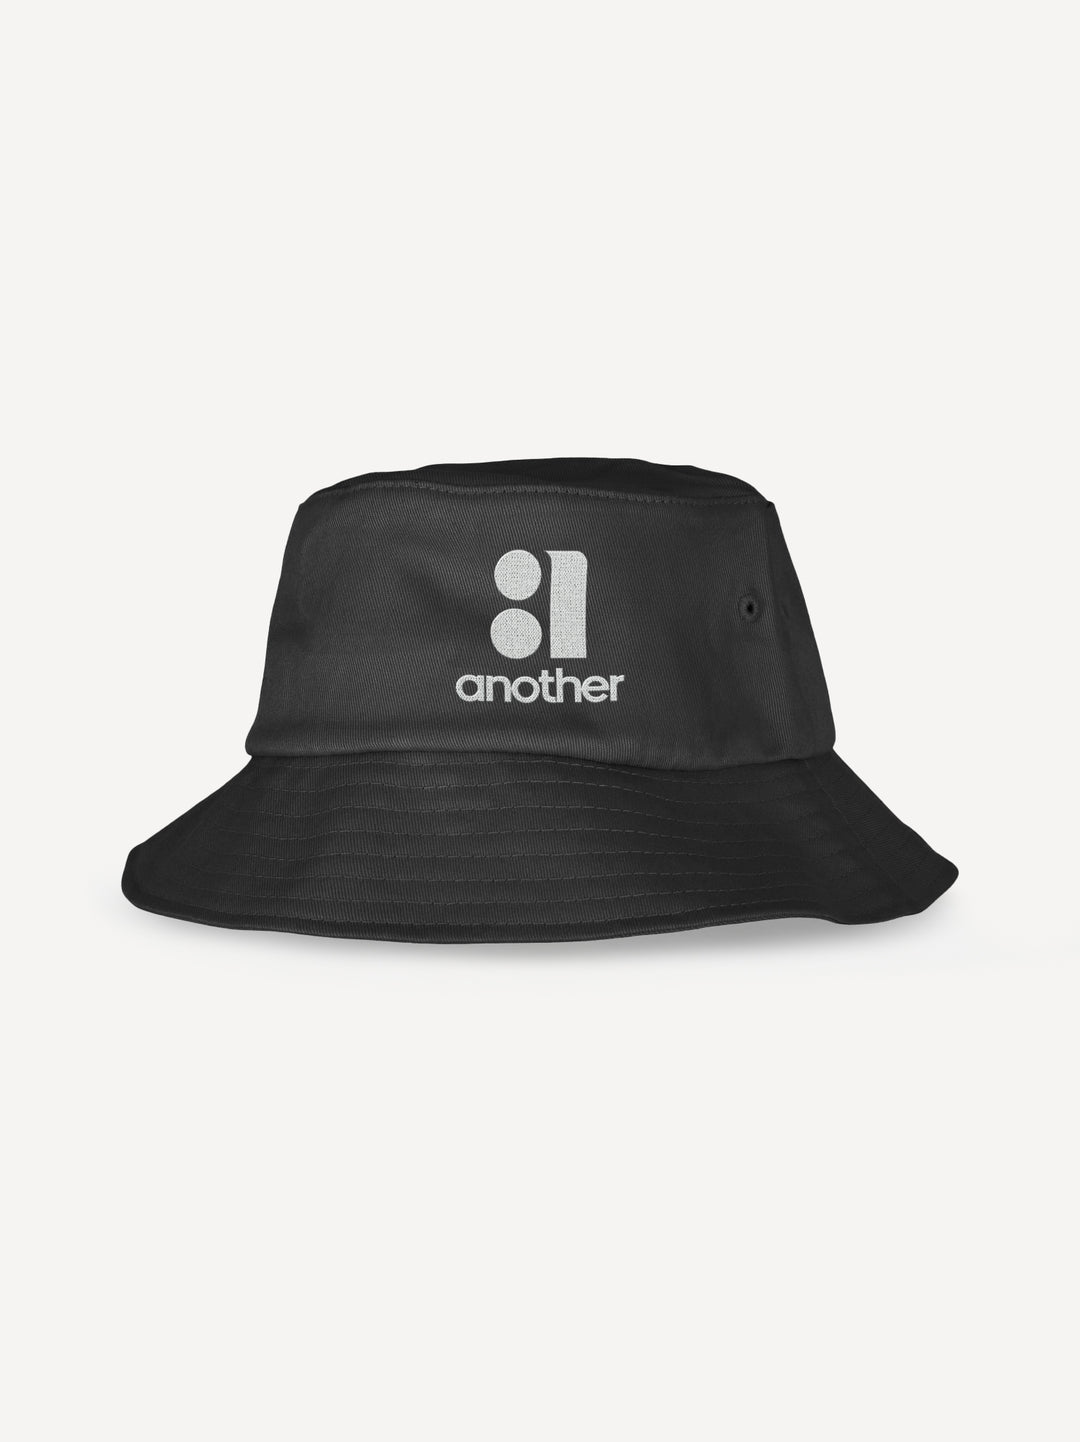 Another Bucket Hat